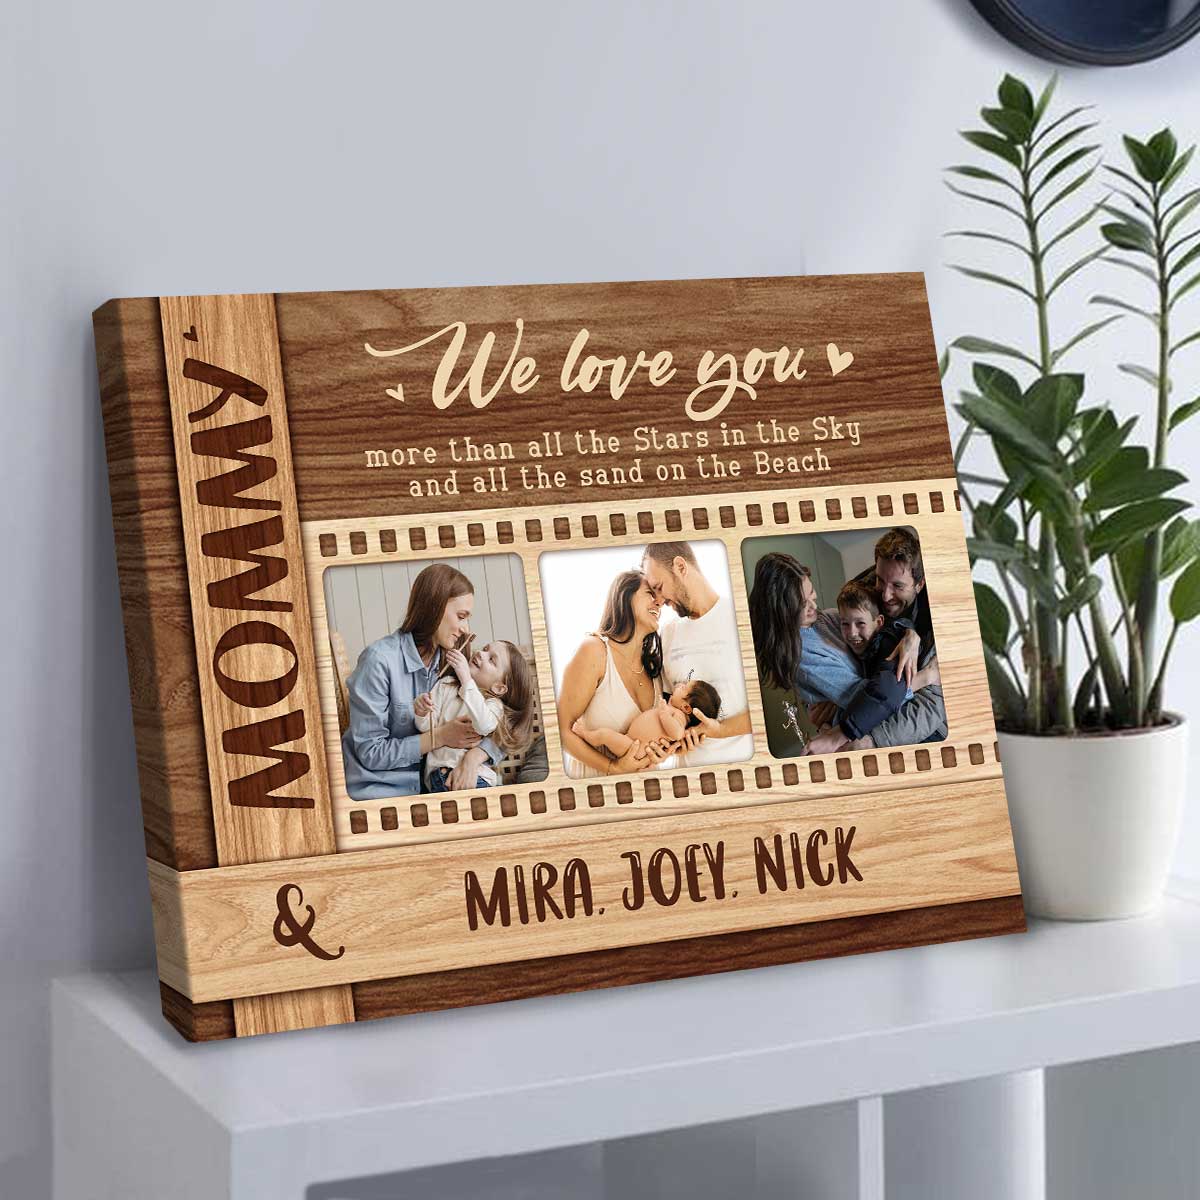 FA6 Customized Spotify Song Barcode with Photo & Message Digital Print  Wooden Photo Frame for Birthday Gifts - Turquoise & White - 8x8 Inch :  Amazon.in: Home & Kitchen